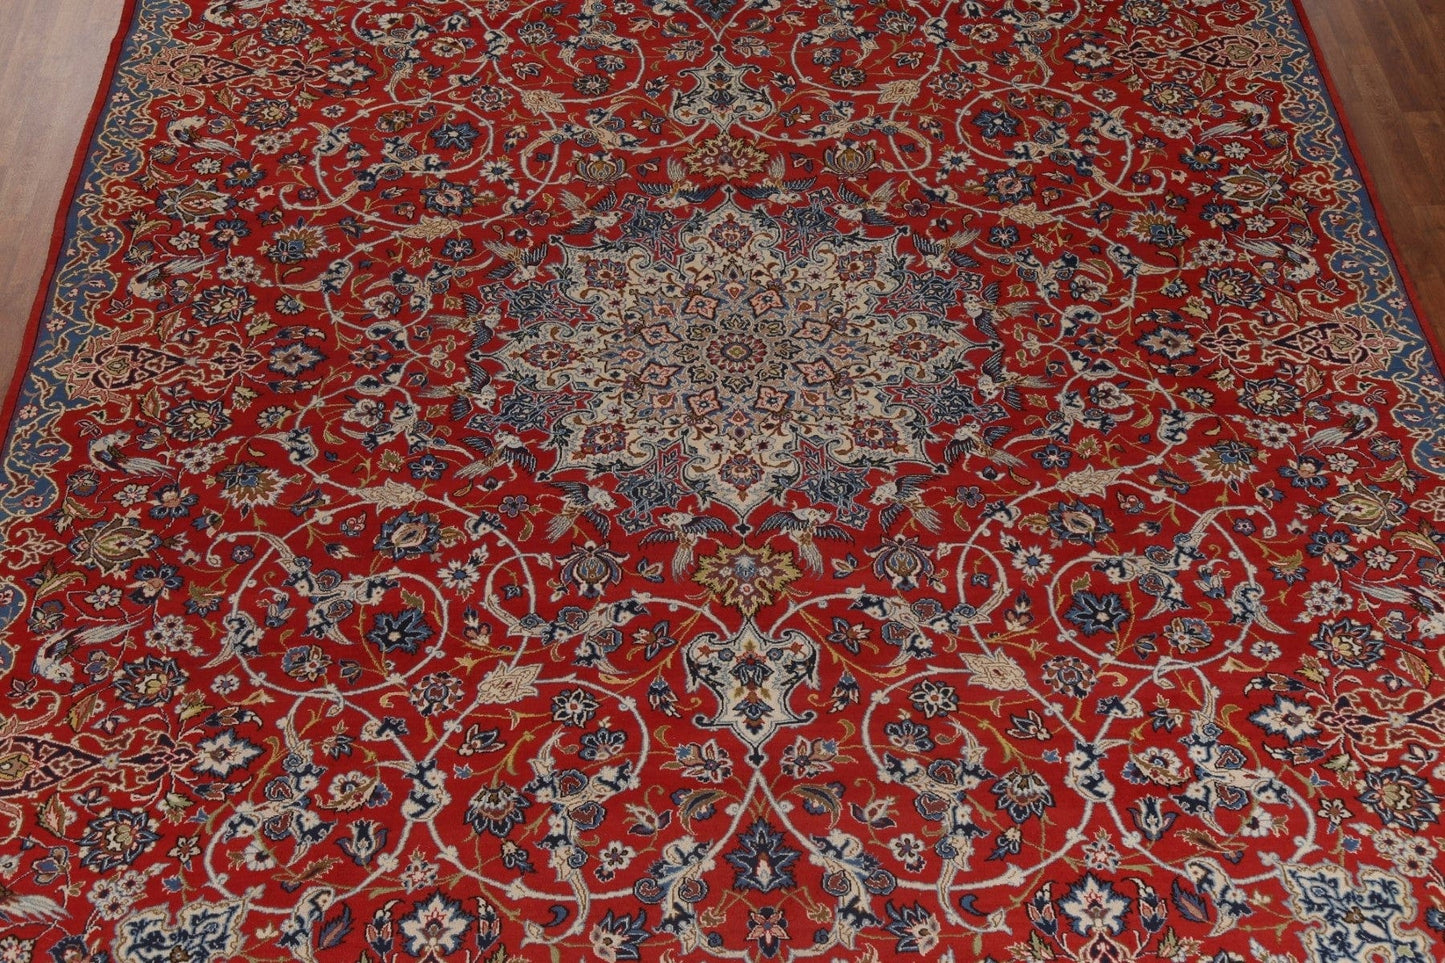 Vintage Red Floral Isfahan Persian Area Rug 10x13